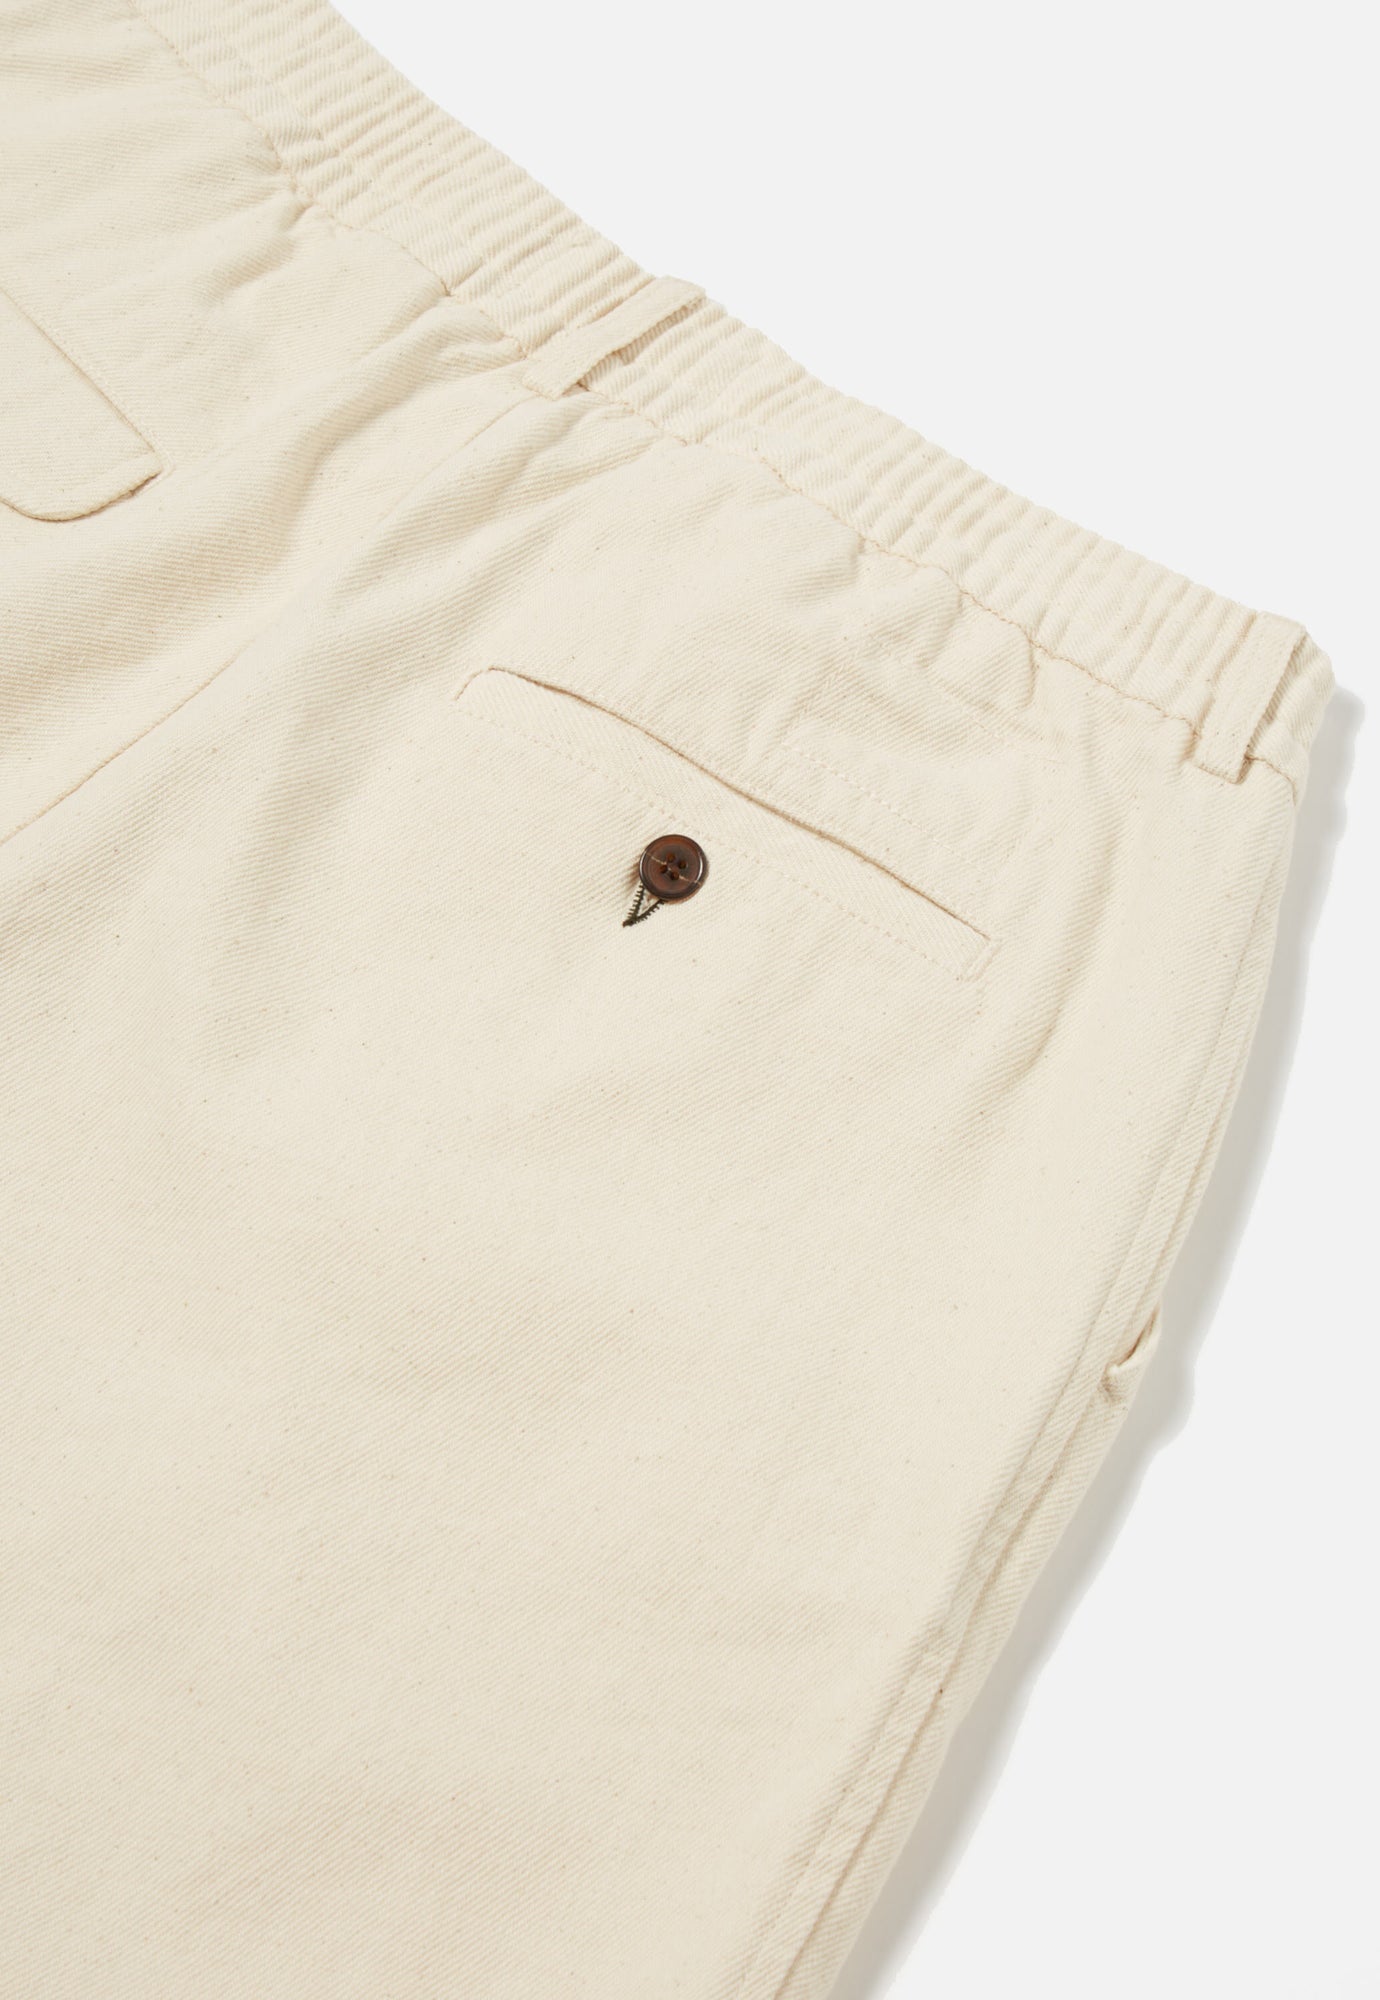 Universal Works Pleated Track Short in Ecru Recycled Cotton